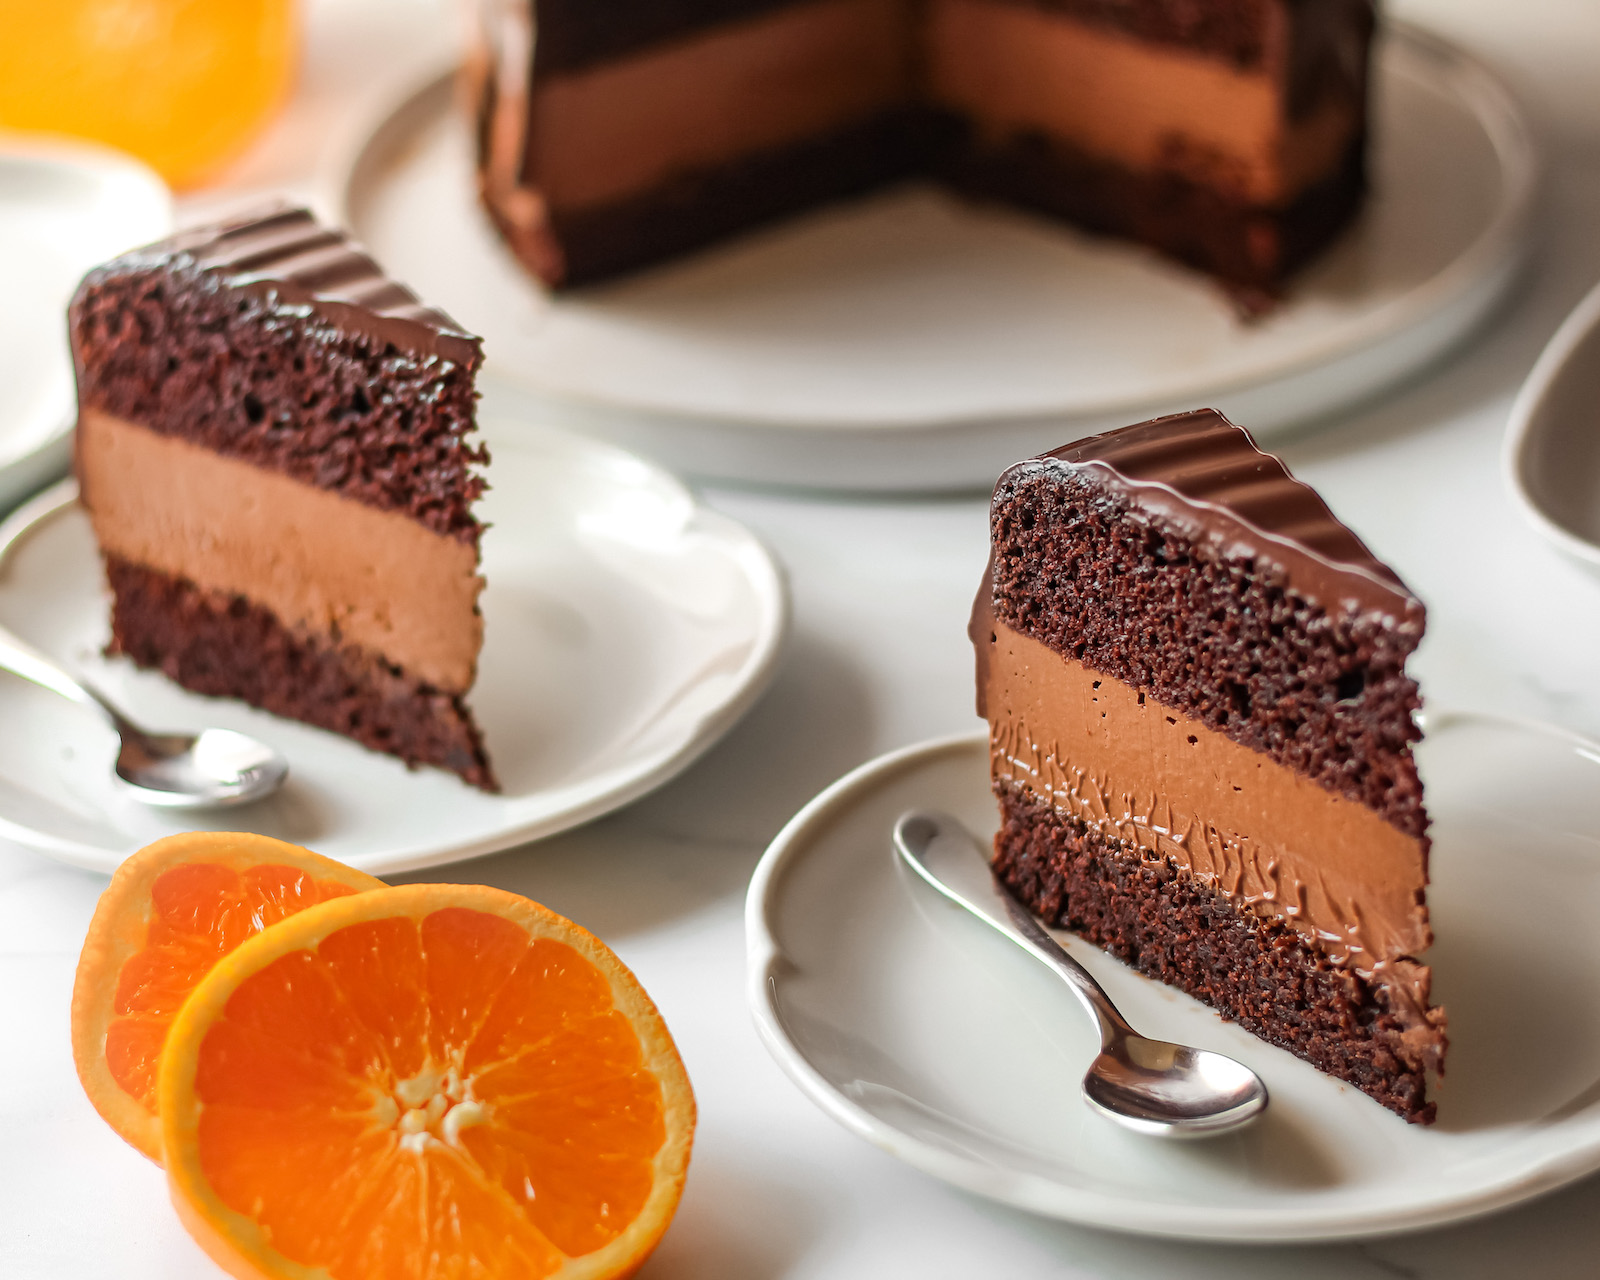 Chocolate Mousse Cake (gluten free + make ahead) Step by Step Photos!-mncb.edu.vn